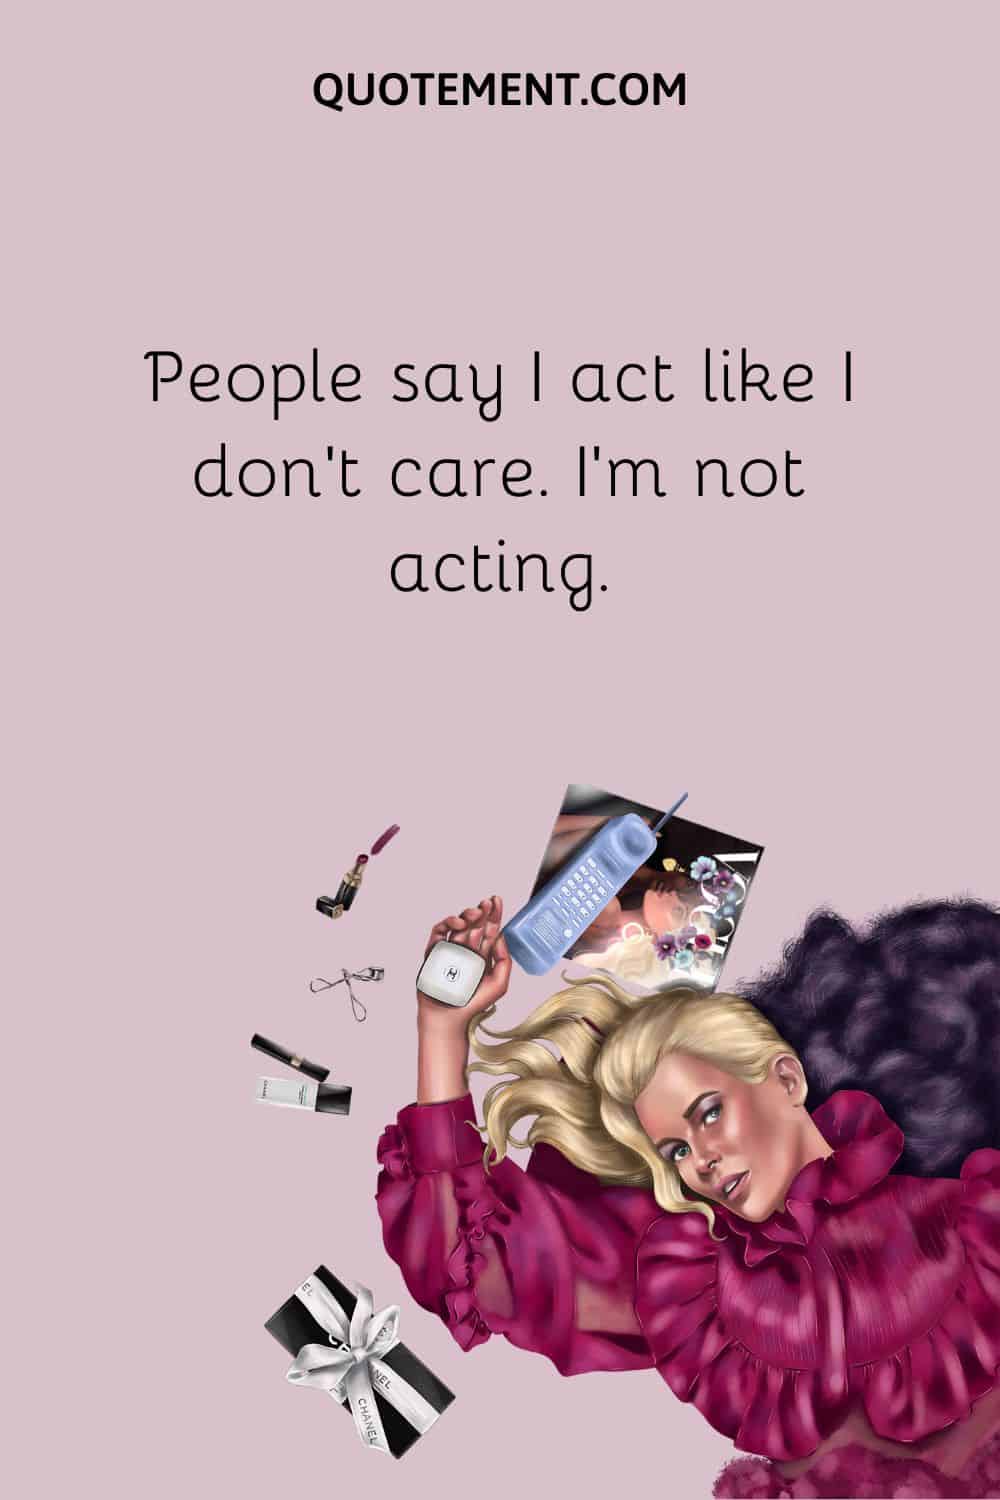 People say I act like I don’t care. I’m not acting